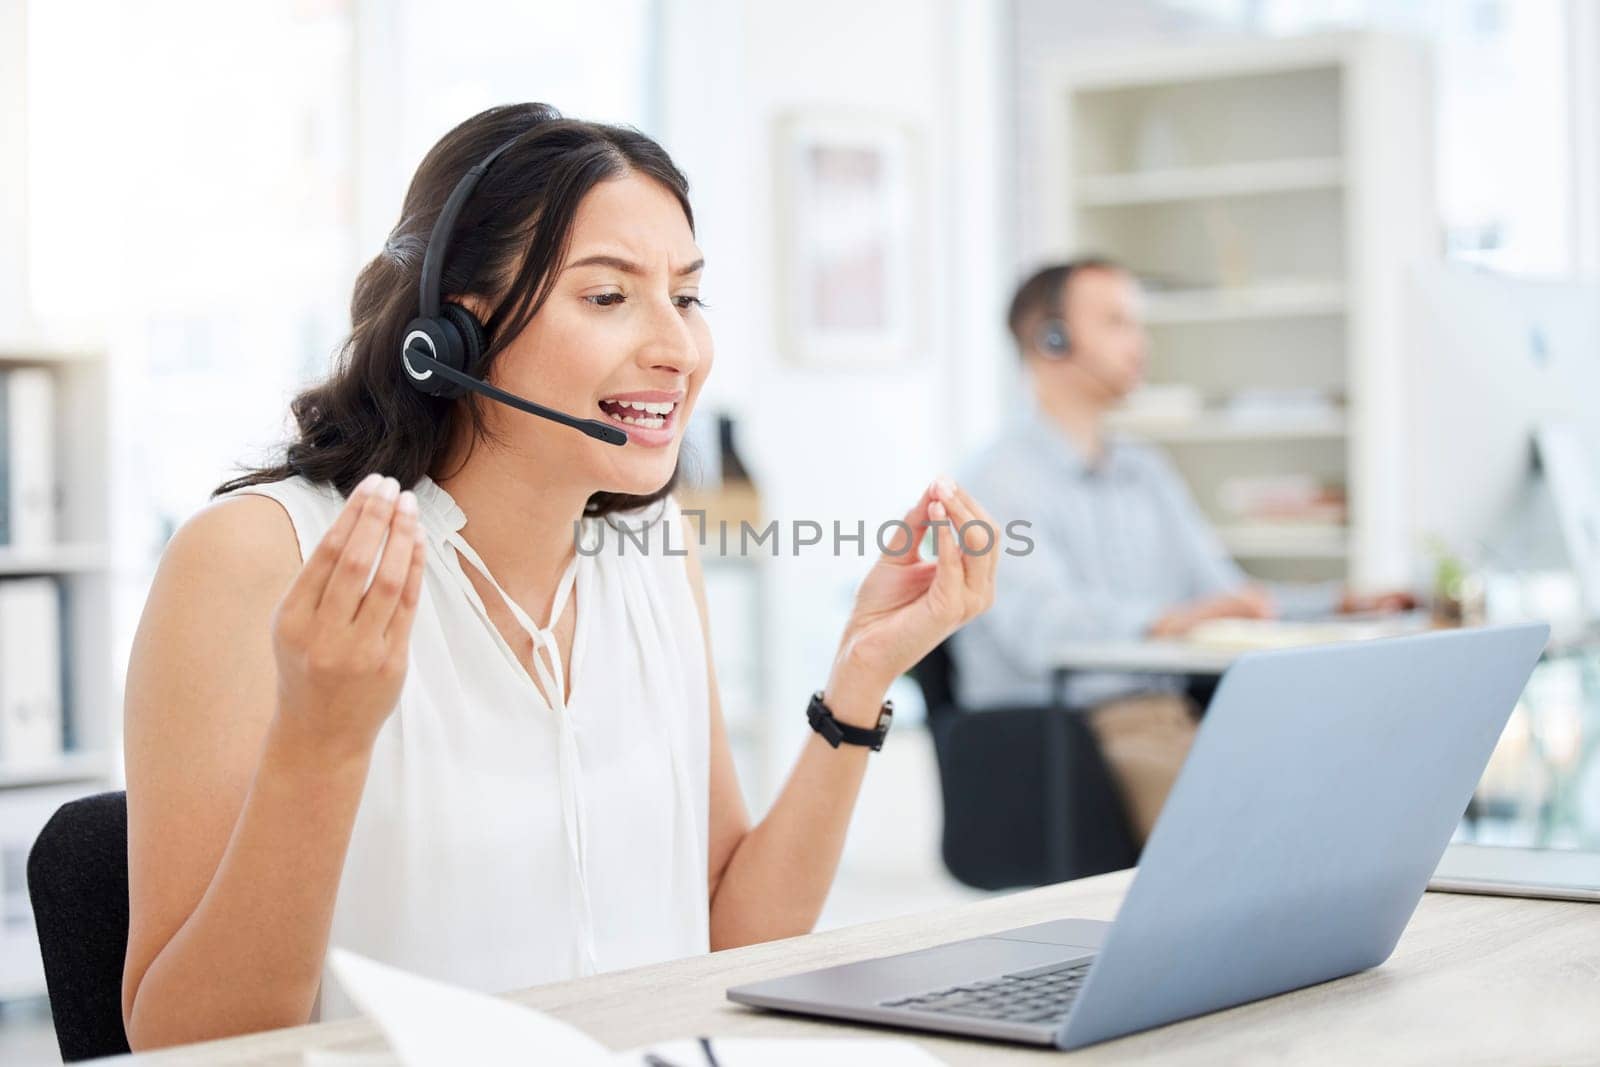 Woman, callcenter and anger, frustrated with phone call and laptop software glitch or communication fail and confused. Customer service, tech support mistake and 404 with annoyed female consultant.